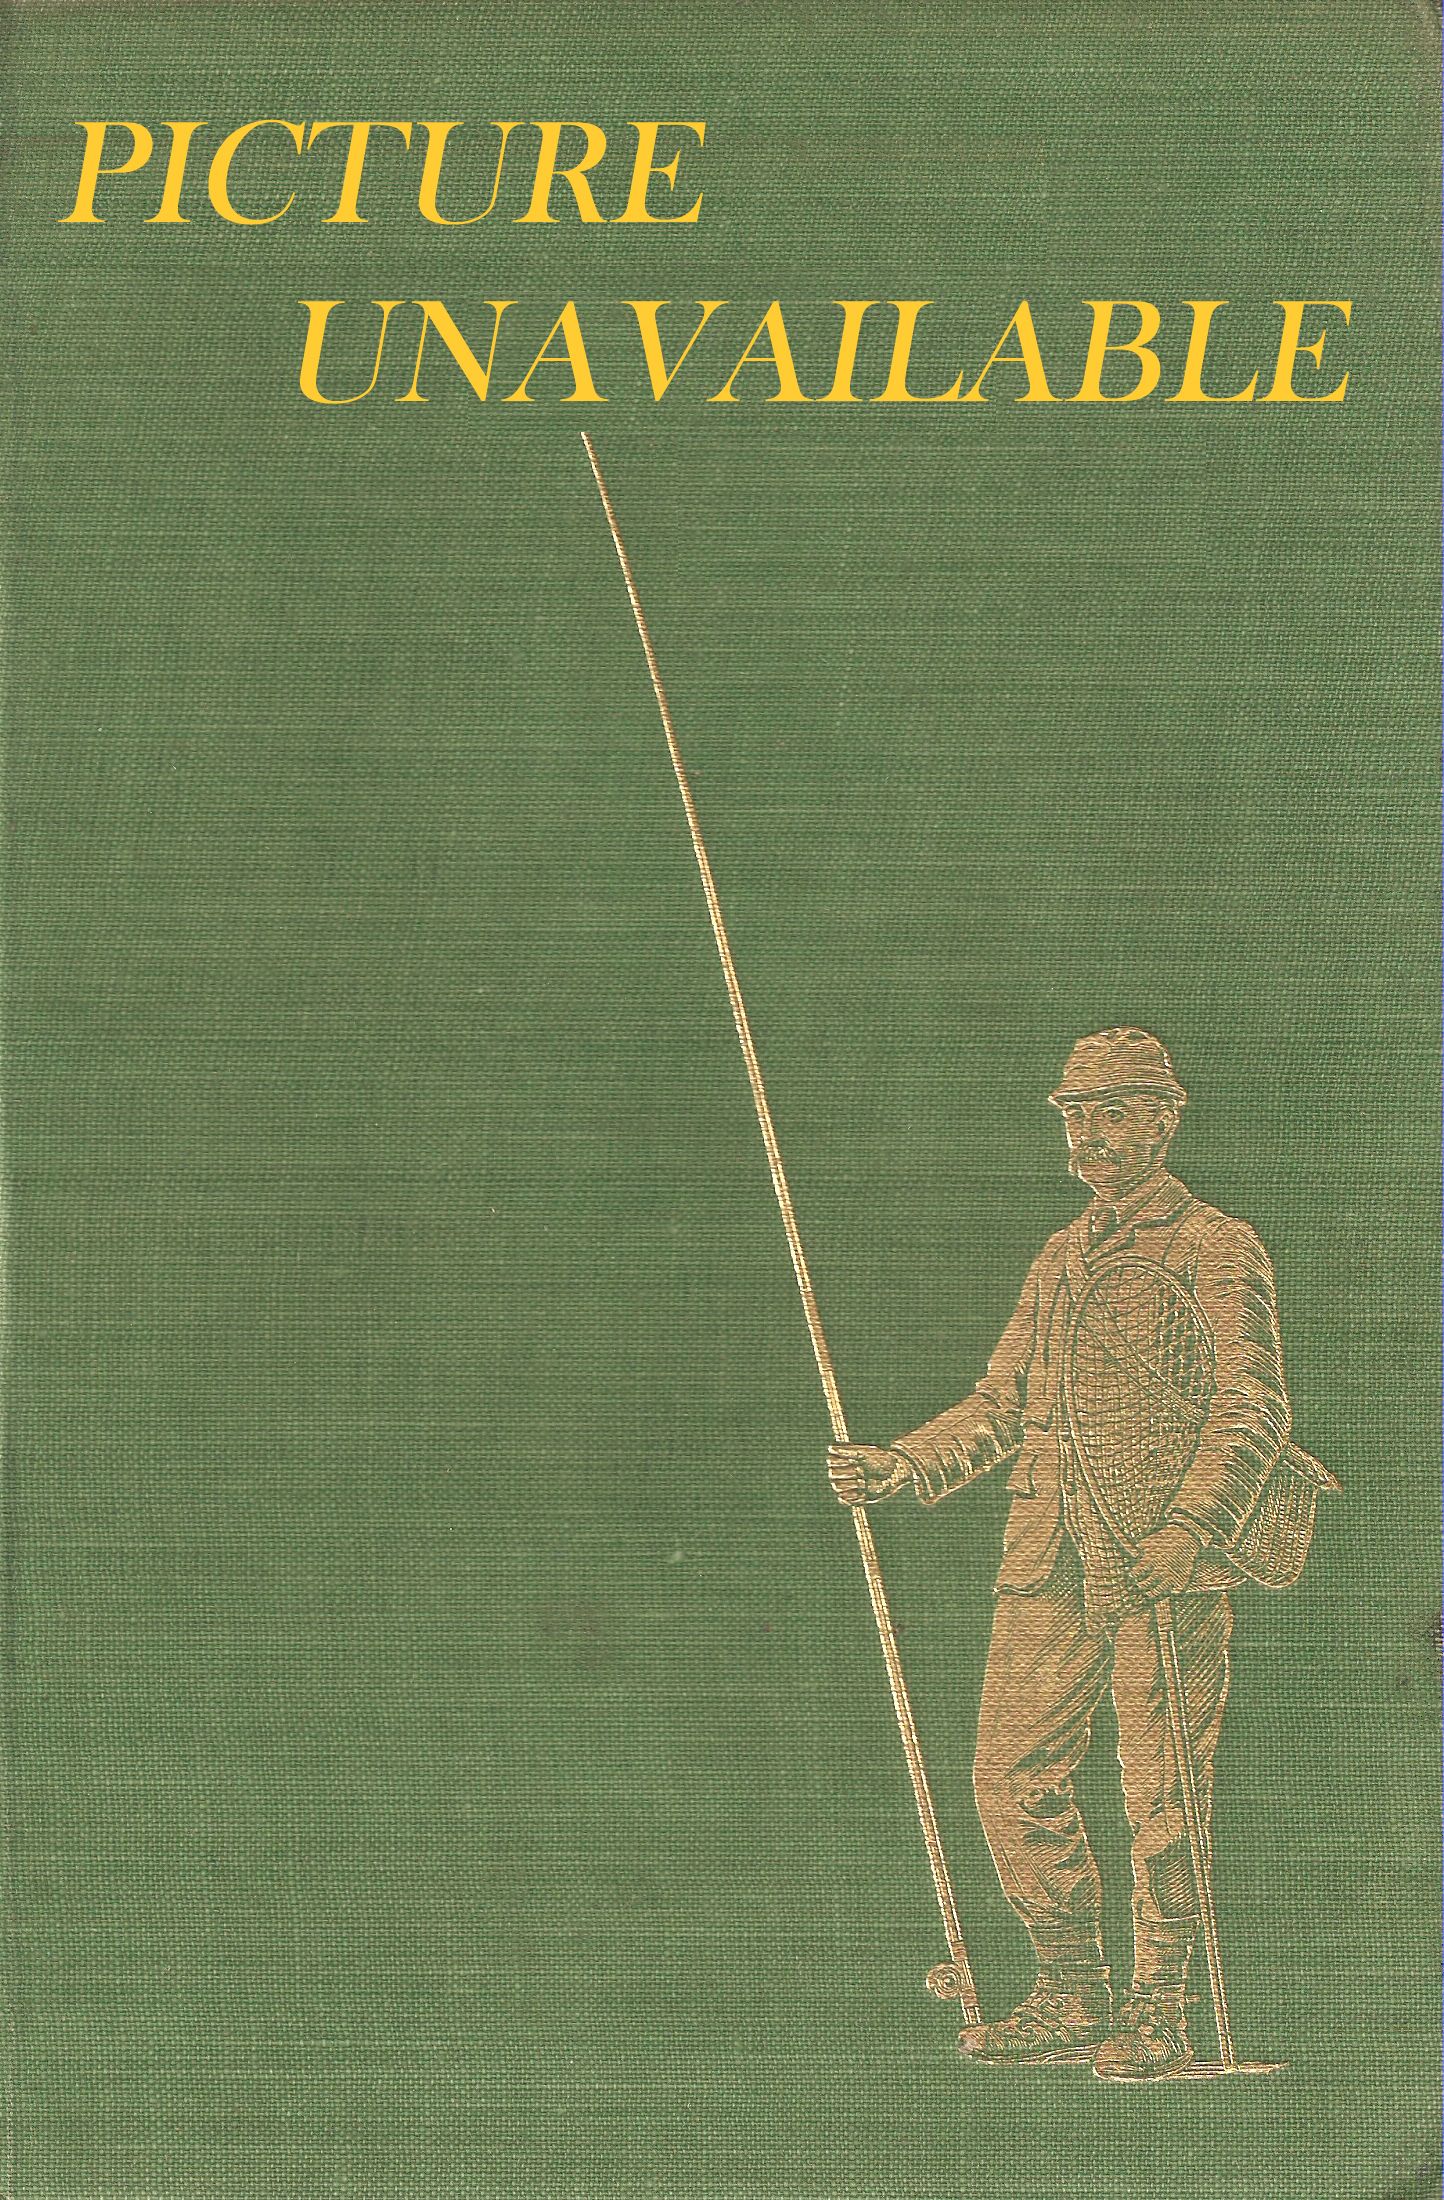 POPULAR SEA FISHING. Compiled and edited by Peter Wheat. With line  drawings in the text by Baz East and sixteen pages of photographs.